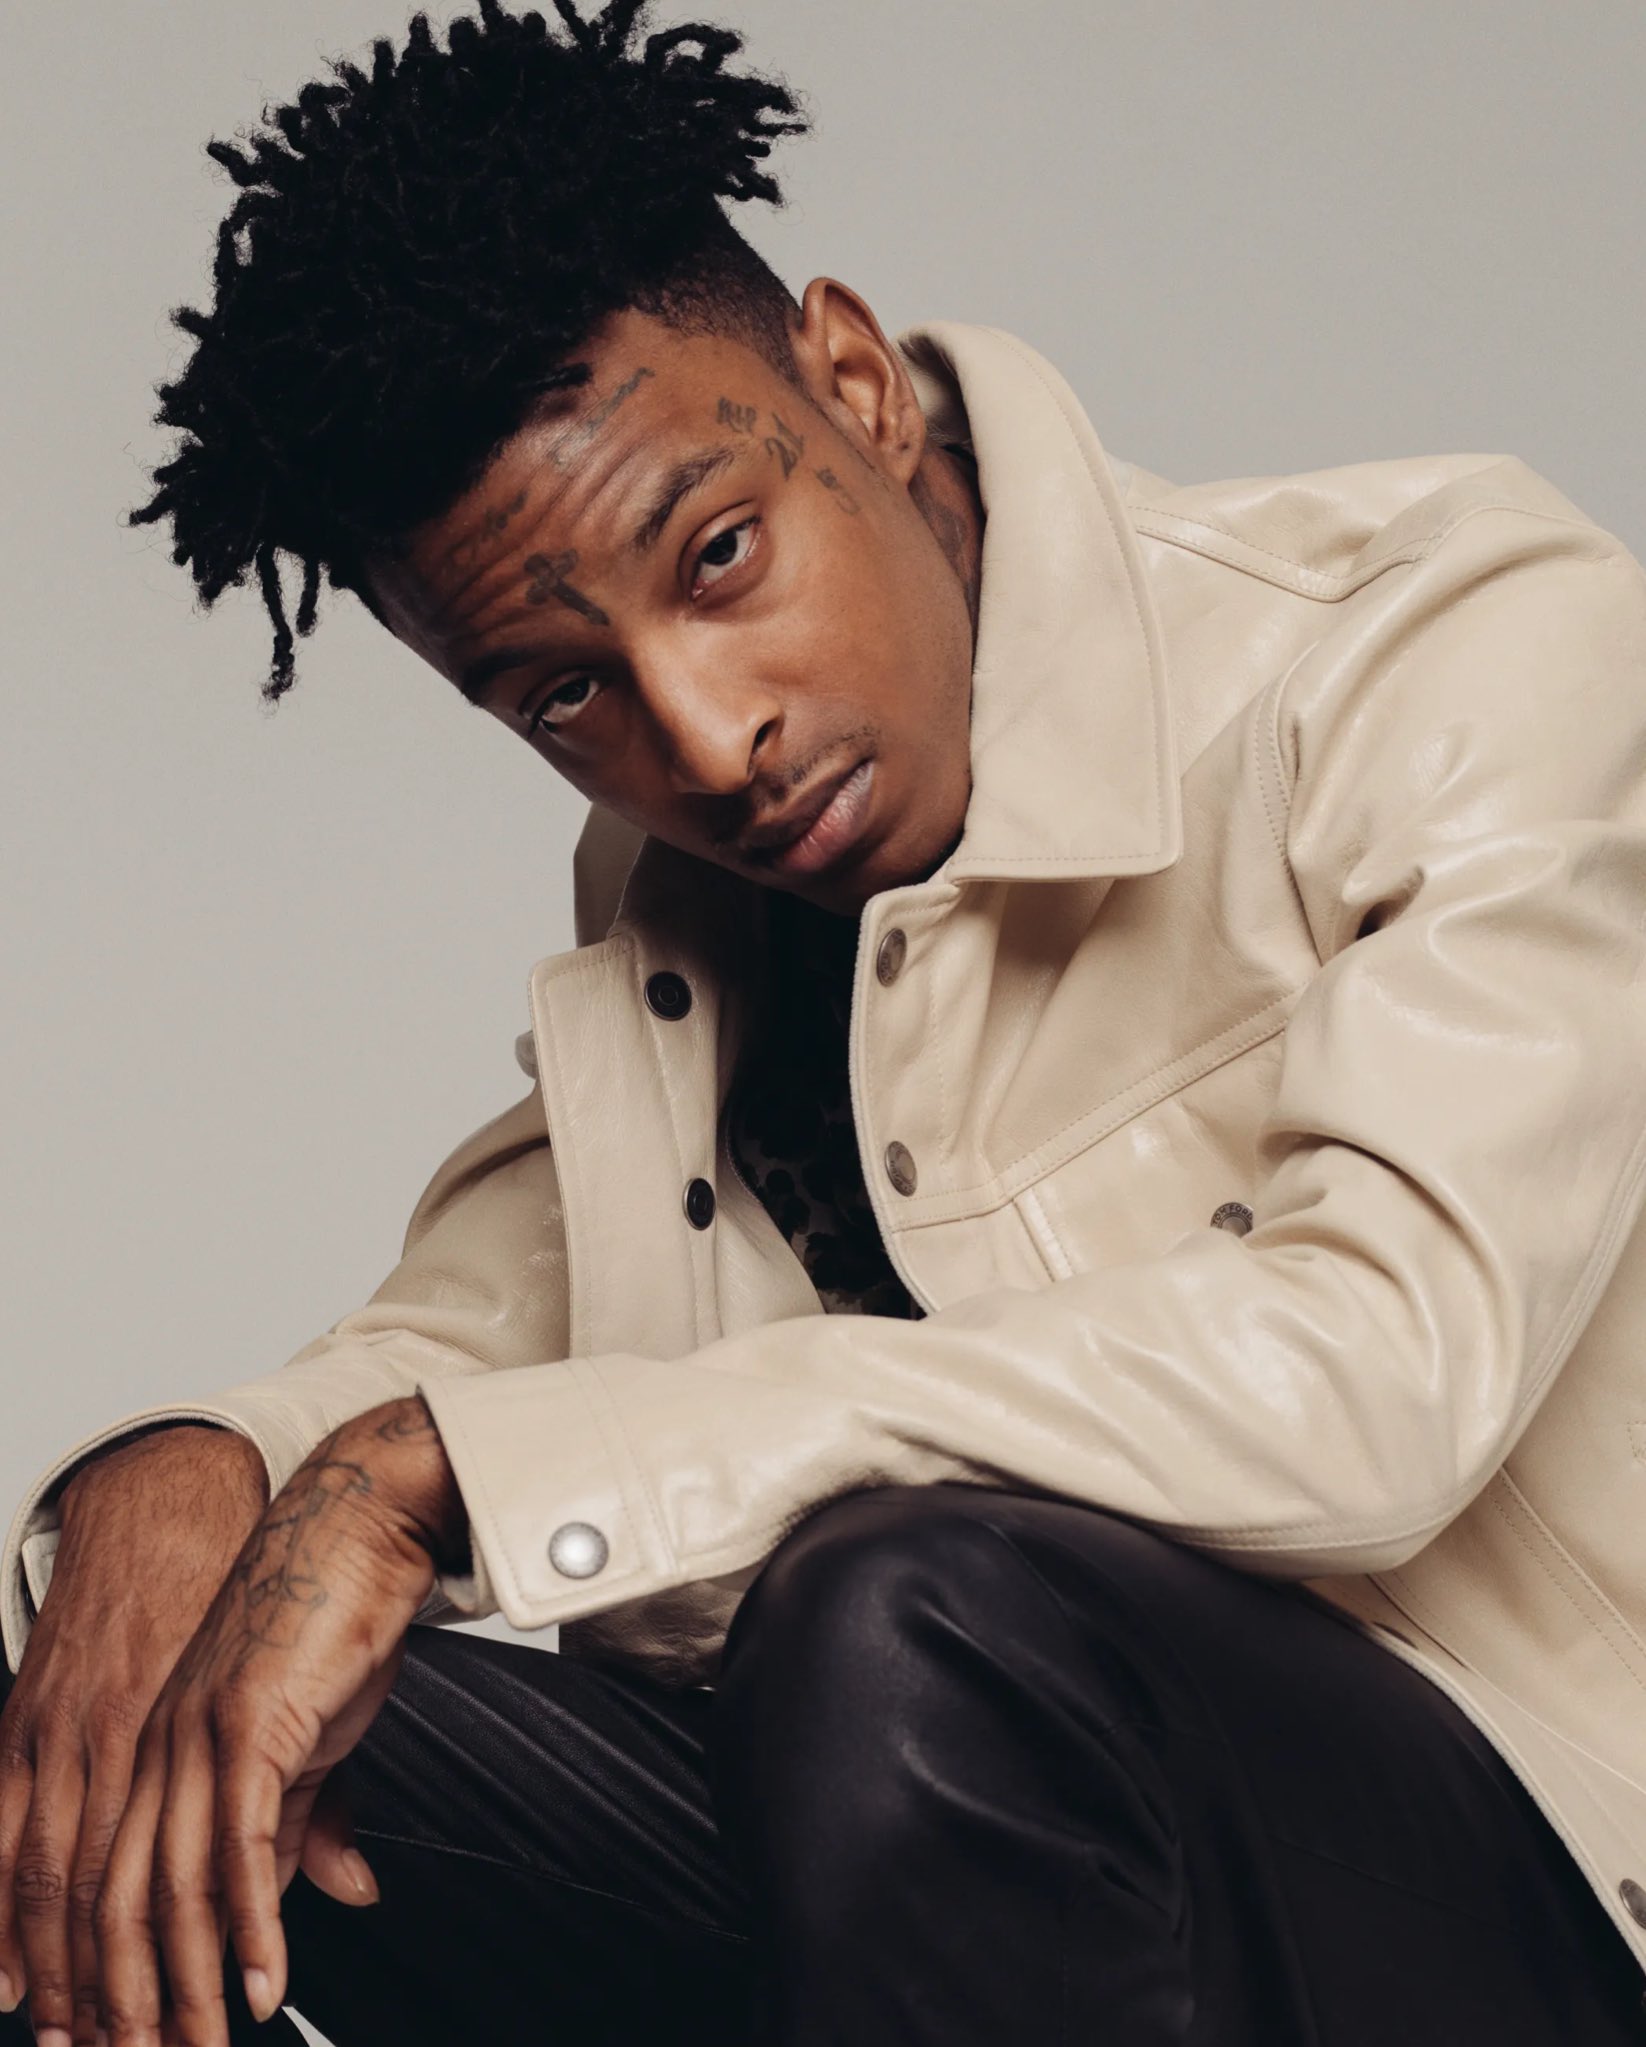 Pop Tingz on X: Complex has named 21 Savage as “the best rapper